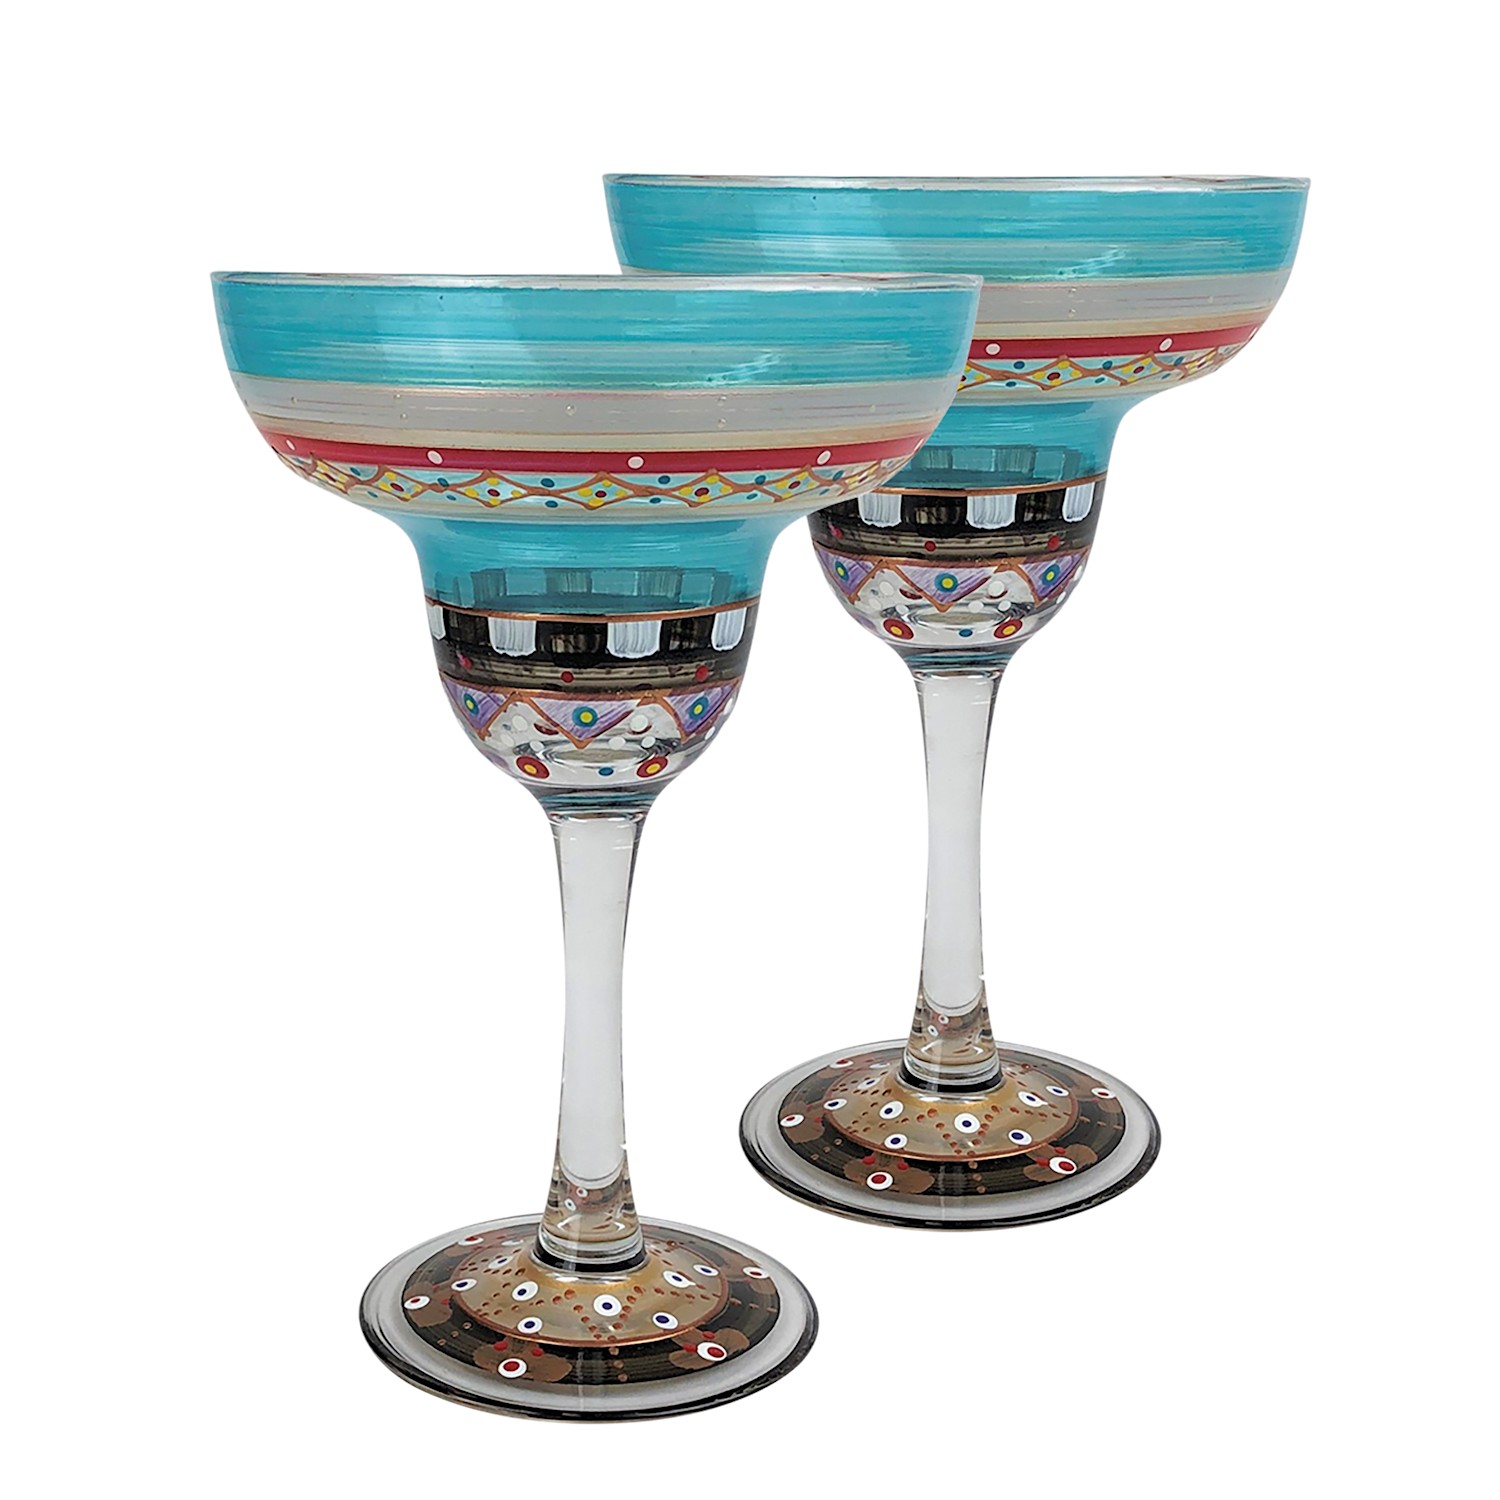 Golden Hill Studio Hand Painted Martini Glasses Patriotic Collection Unique Glassware by USA Artists 4th of July Décor Set of 2 